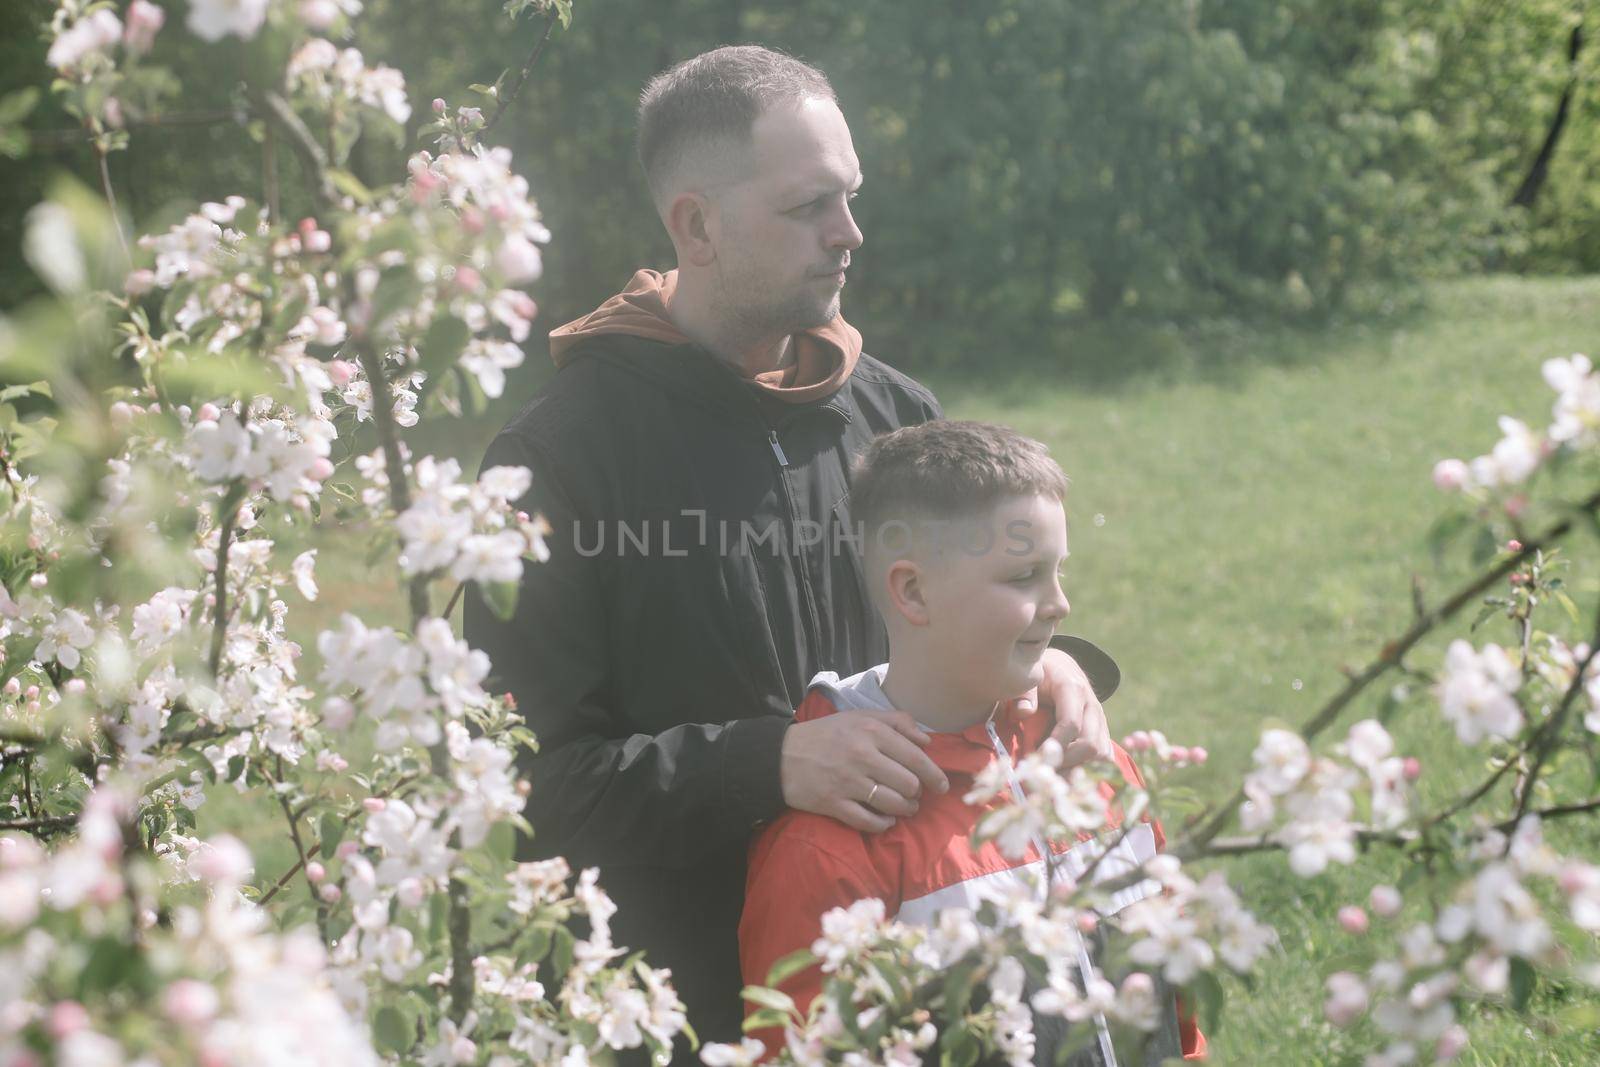 Teenager boy with father together in park in spring.